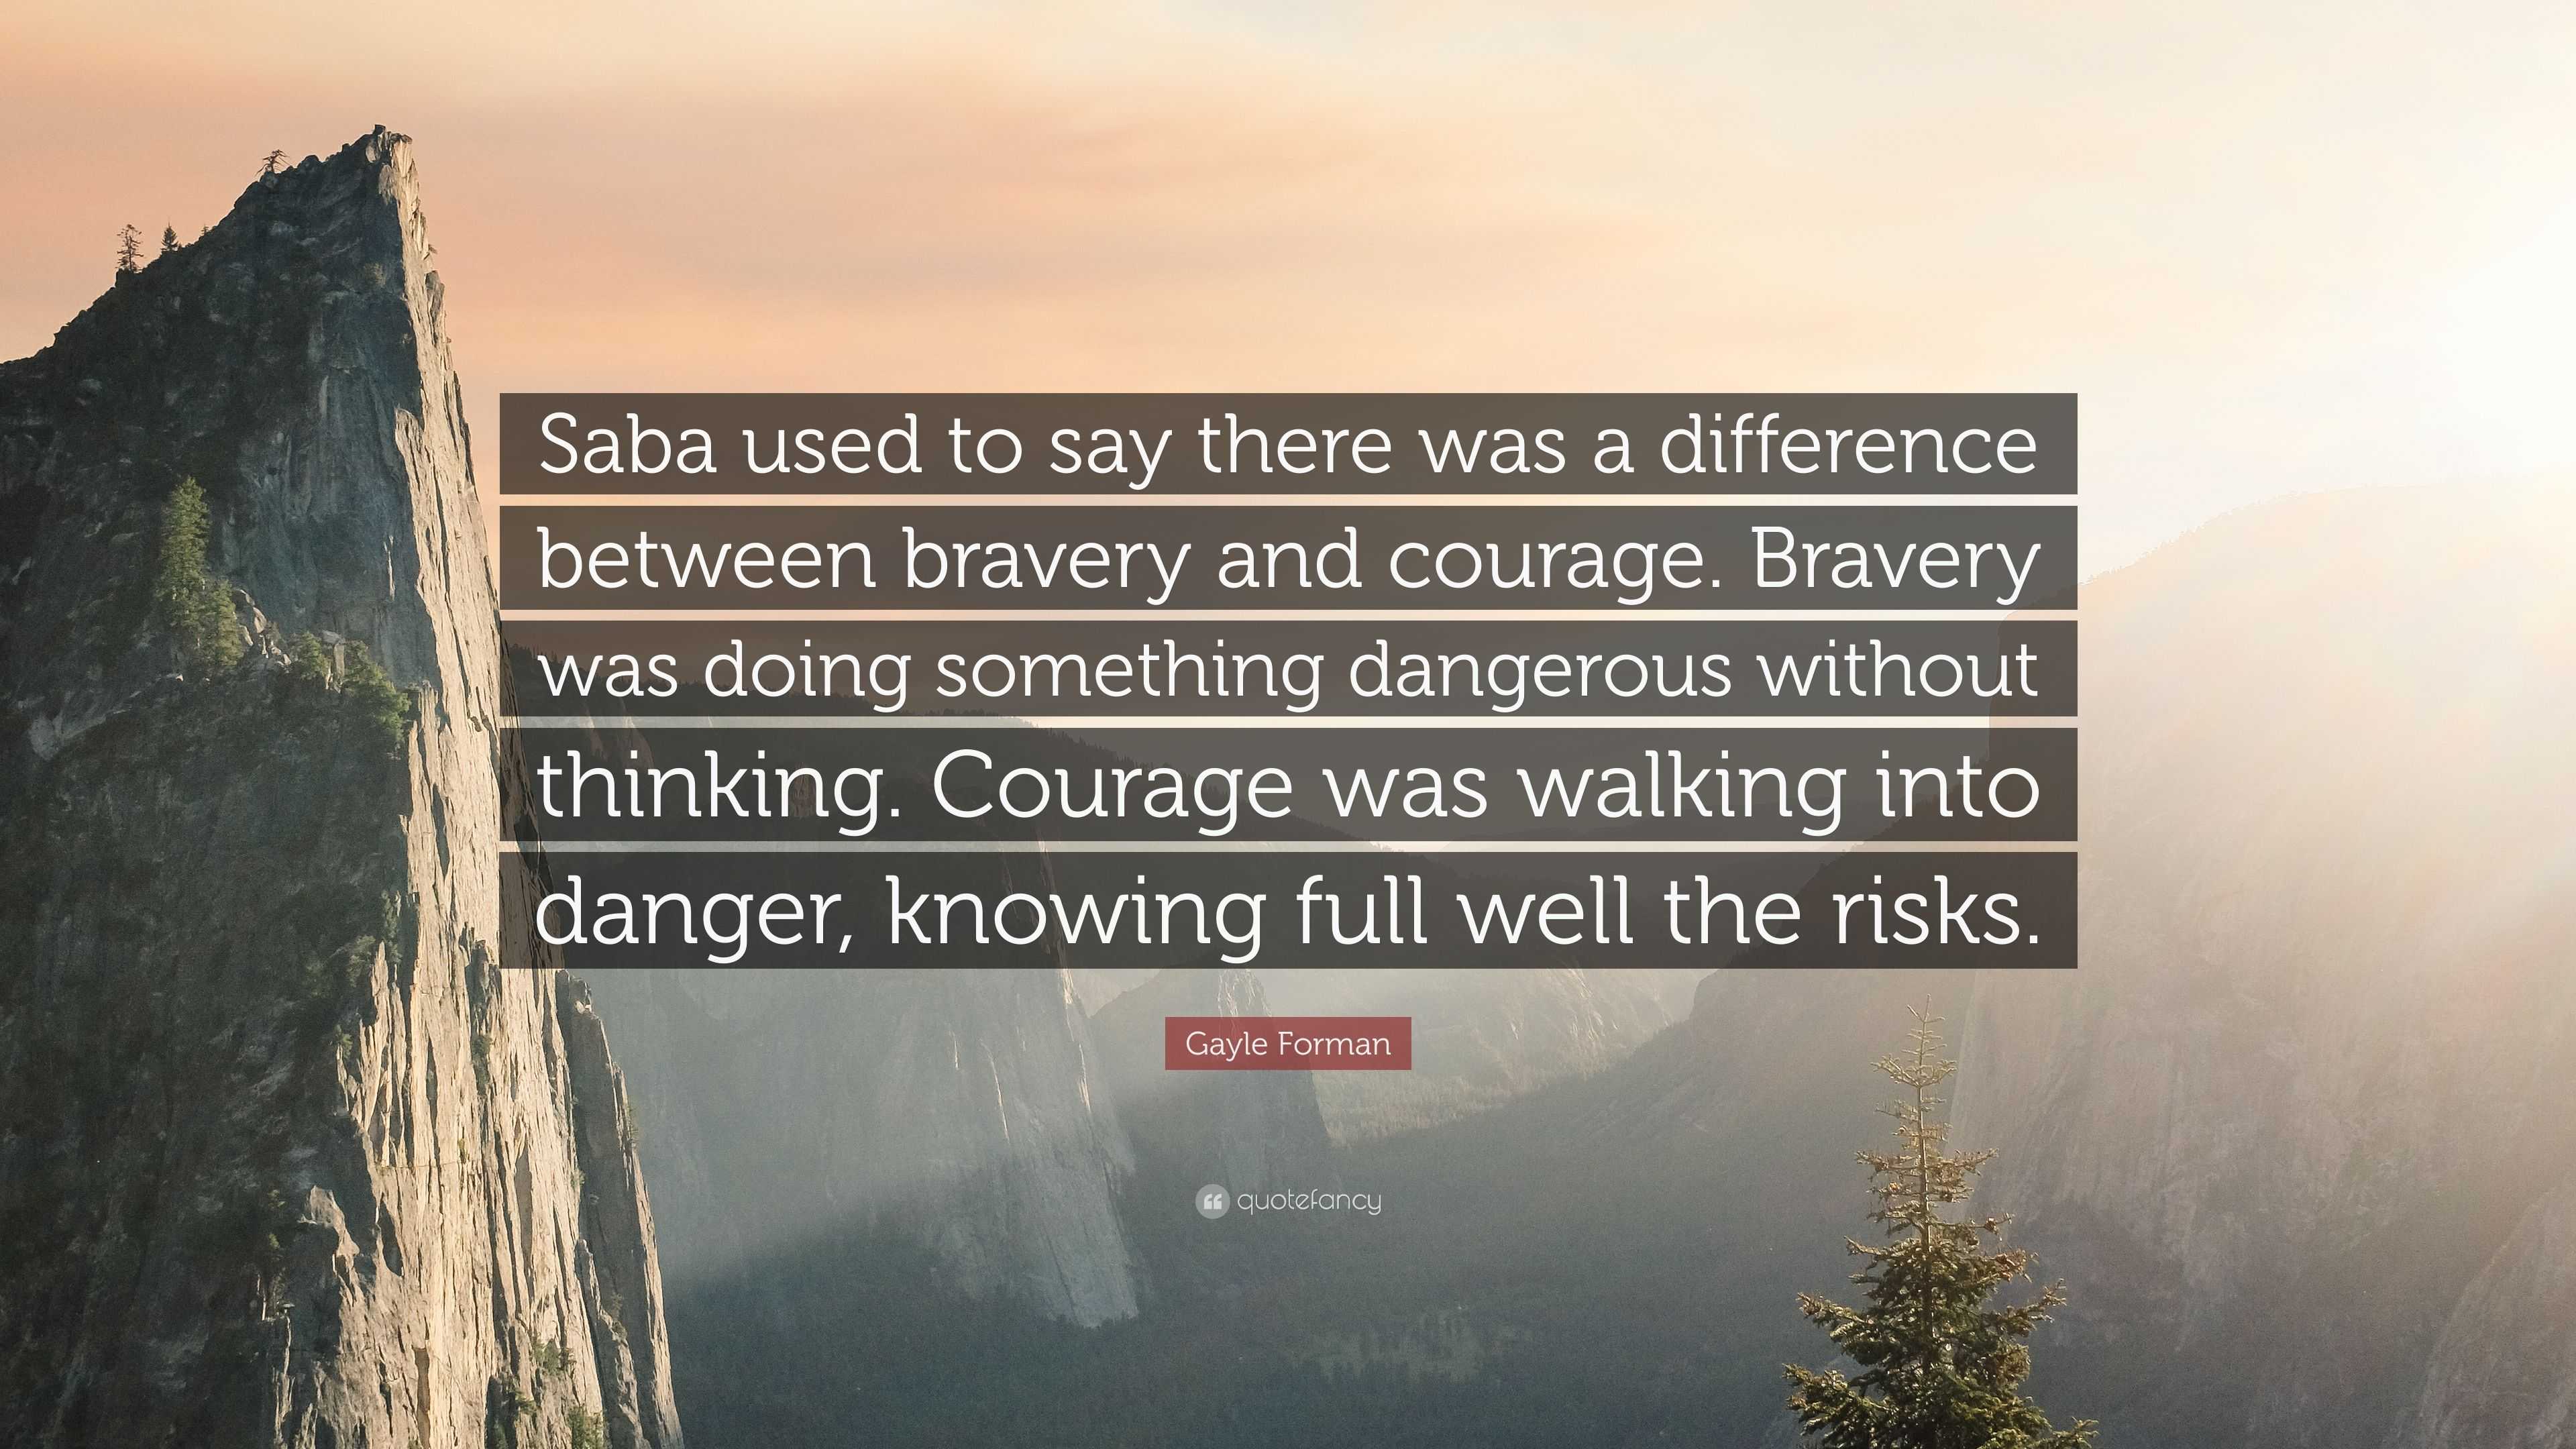 Gayle Forman Quote: “Saba used to say there was a difference between  bravery and courage. Bravery was doing something dangerous without think”